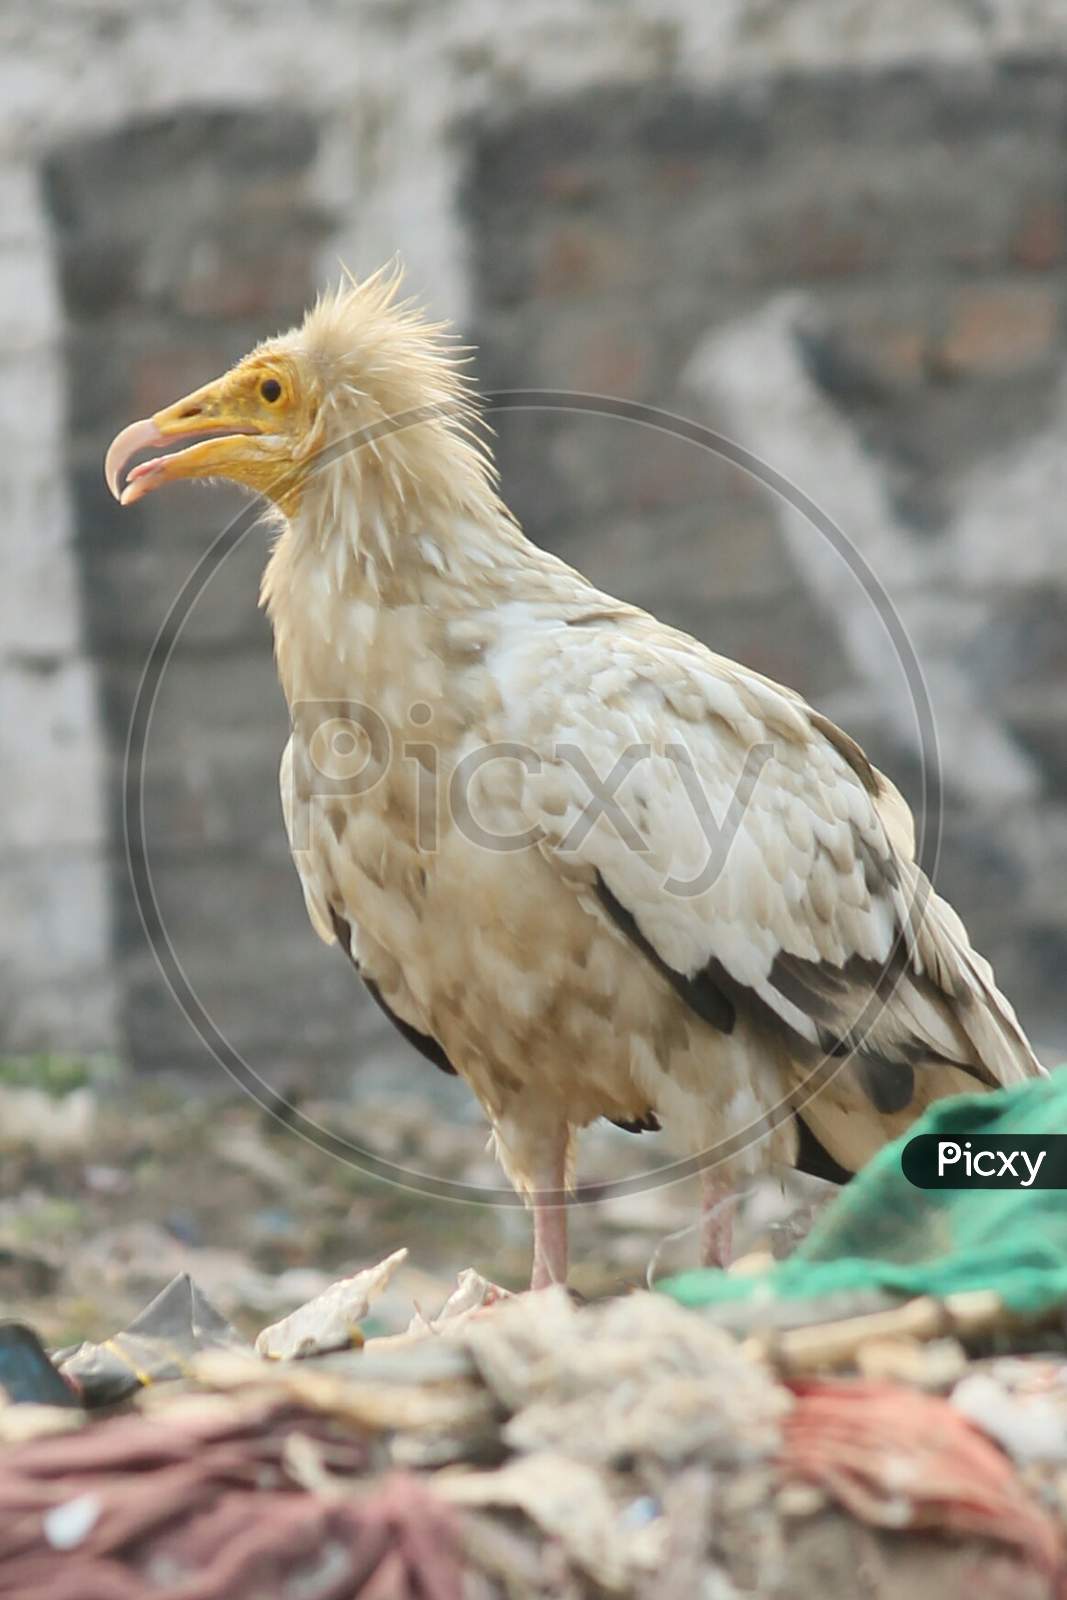 Egyptian Vulture also know as Prophet's chicken.